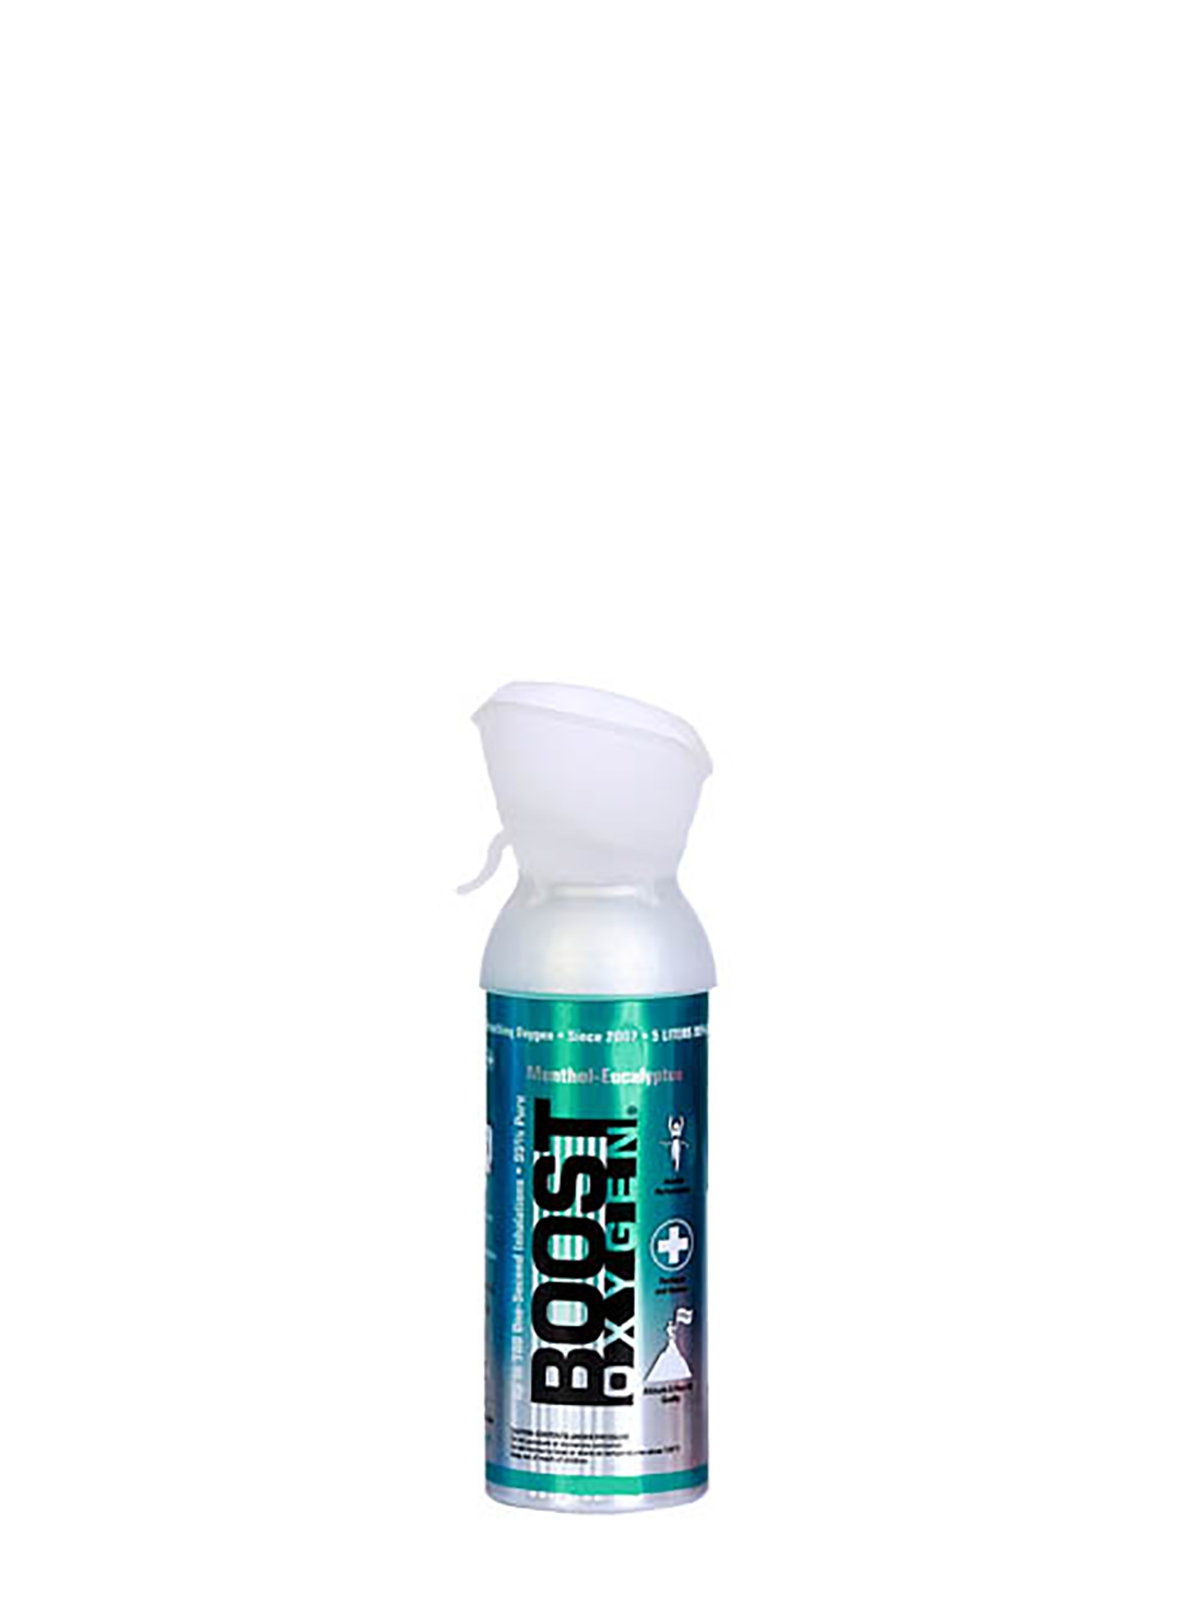 Boost Oxygen Eucalyptus - 95% pure oxygen with taste, 3 liters can